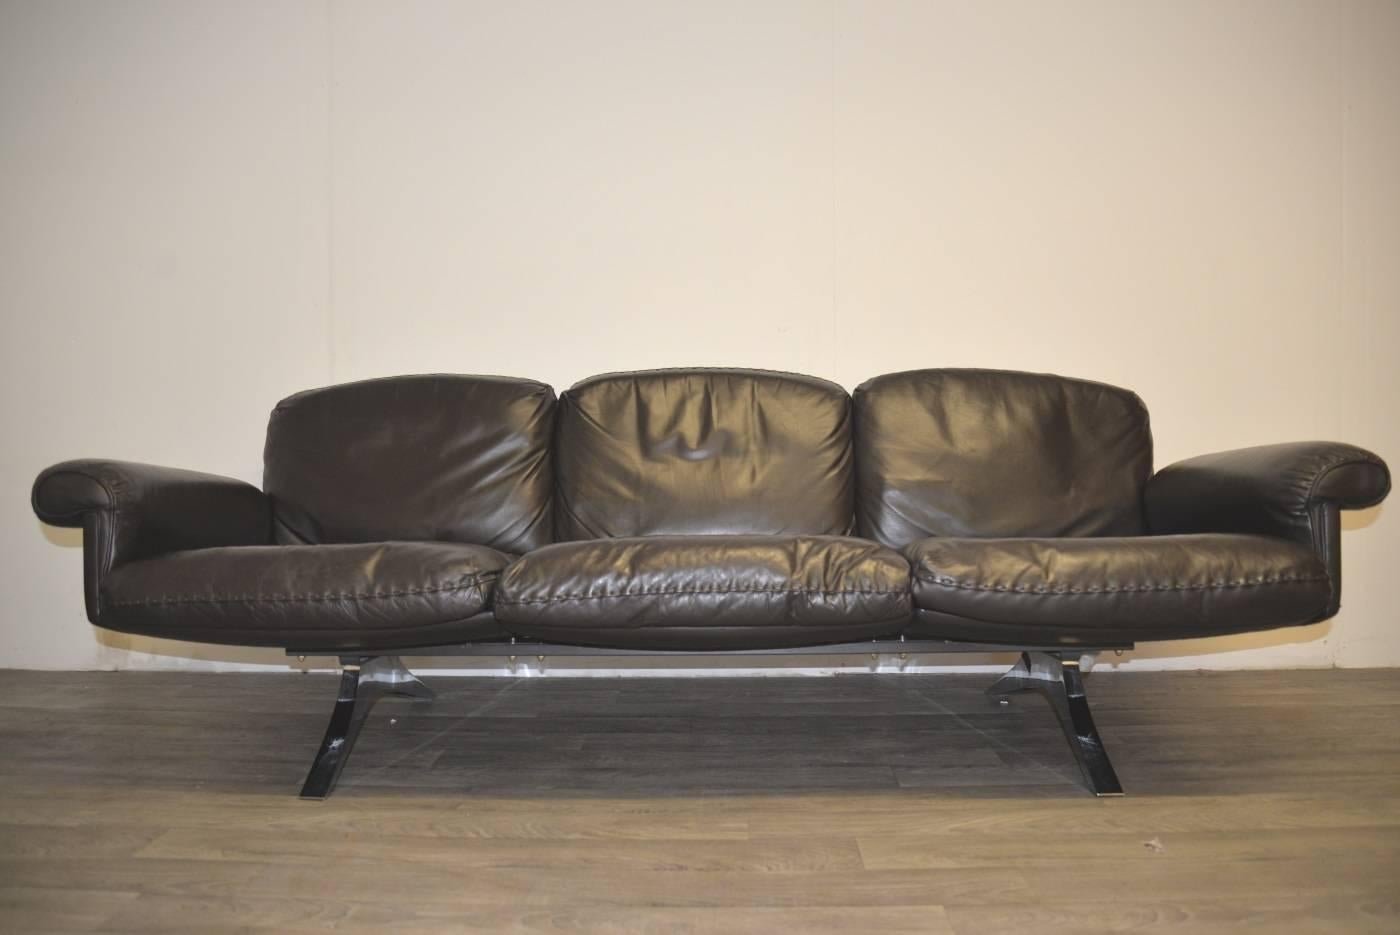 Competitive shipping rates for our US Continent and European customers
Try before you buy service for our UK mainland customers
Returns accepted

Highly desirable retro de Sede 3 seater sofa and matching swivel lounge club armchair. Built in the